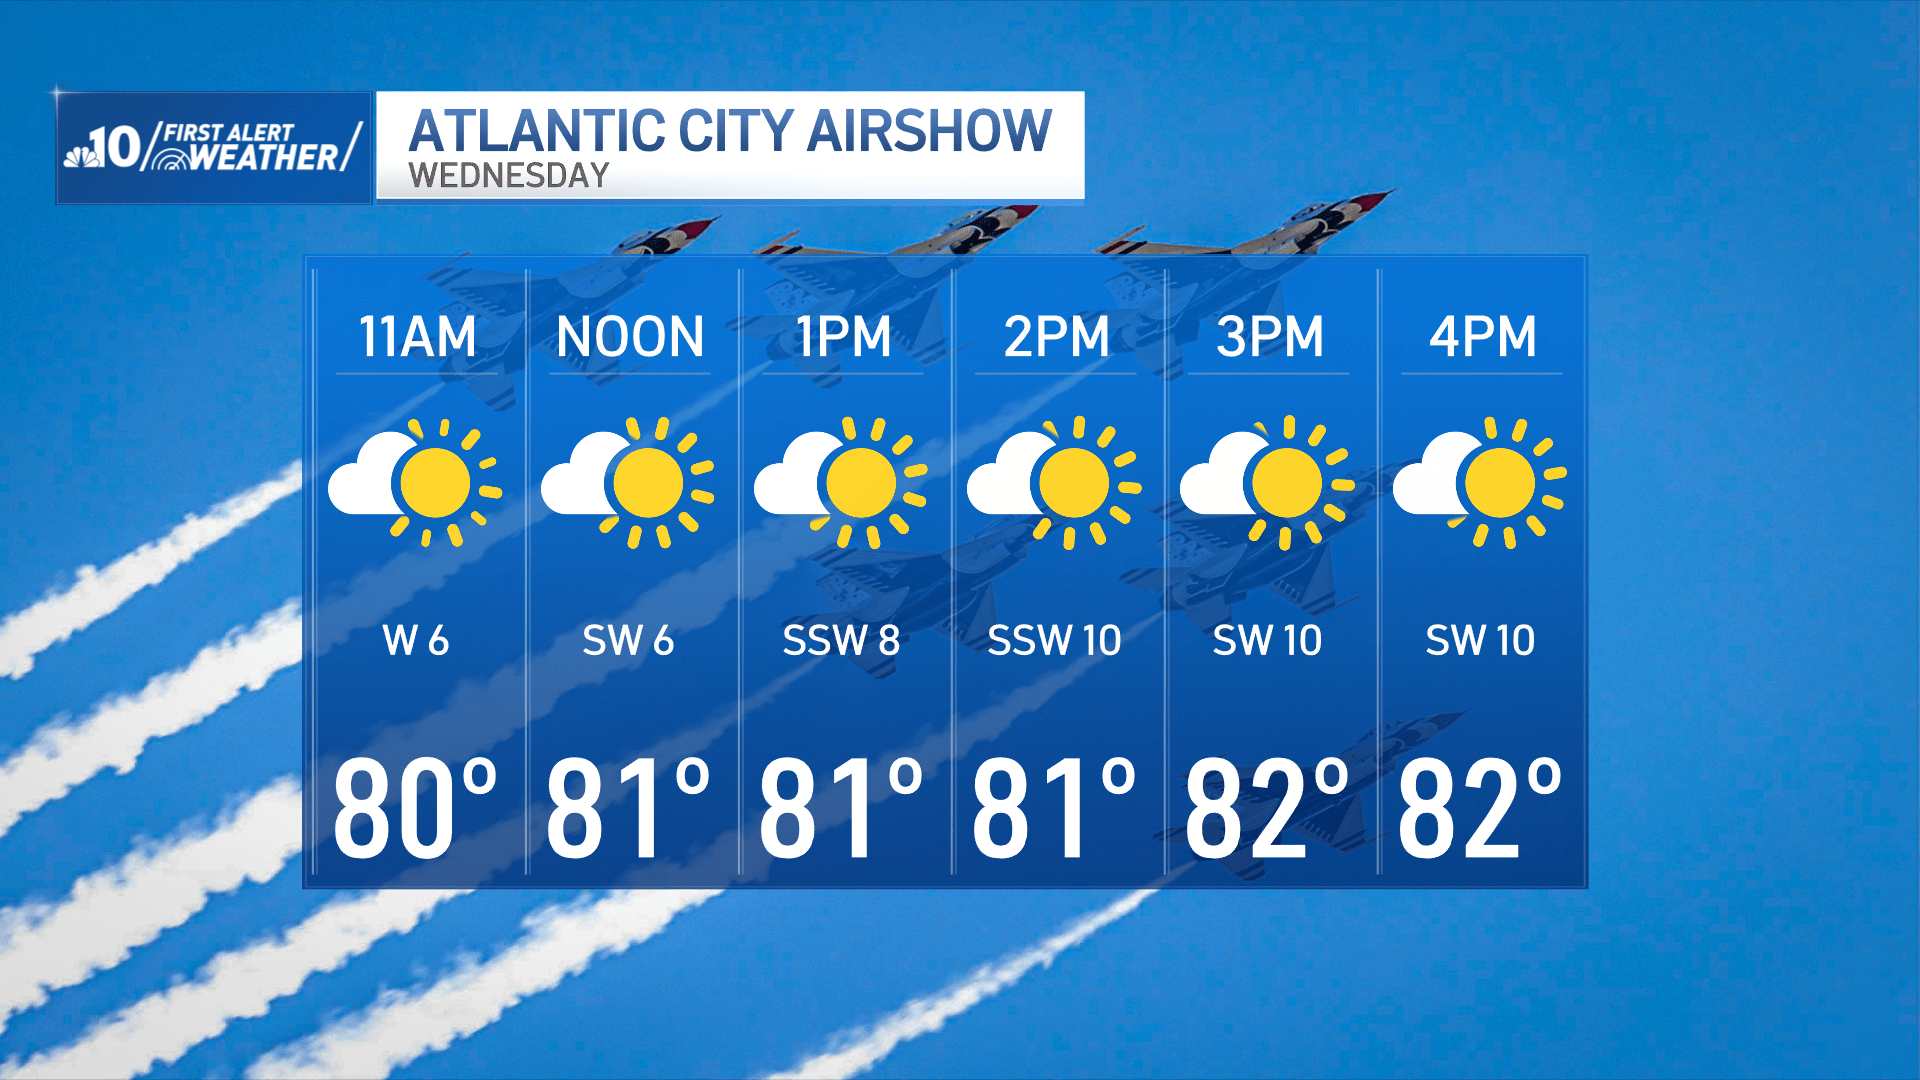 Graphic shows clouds and suns in forecast for 2023 Atlantic City Airshow.